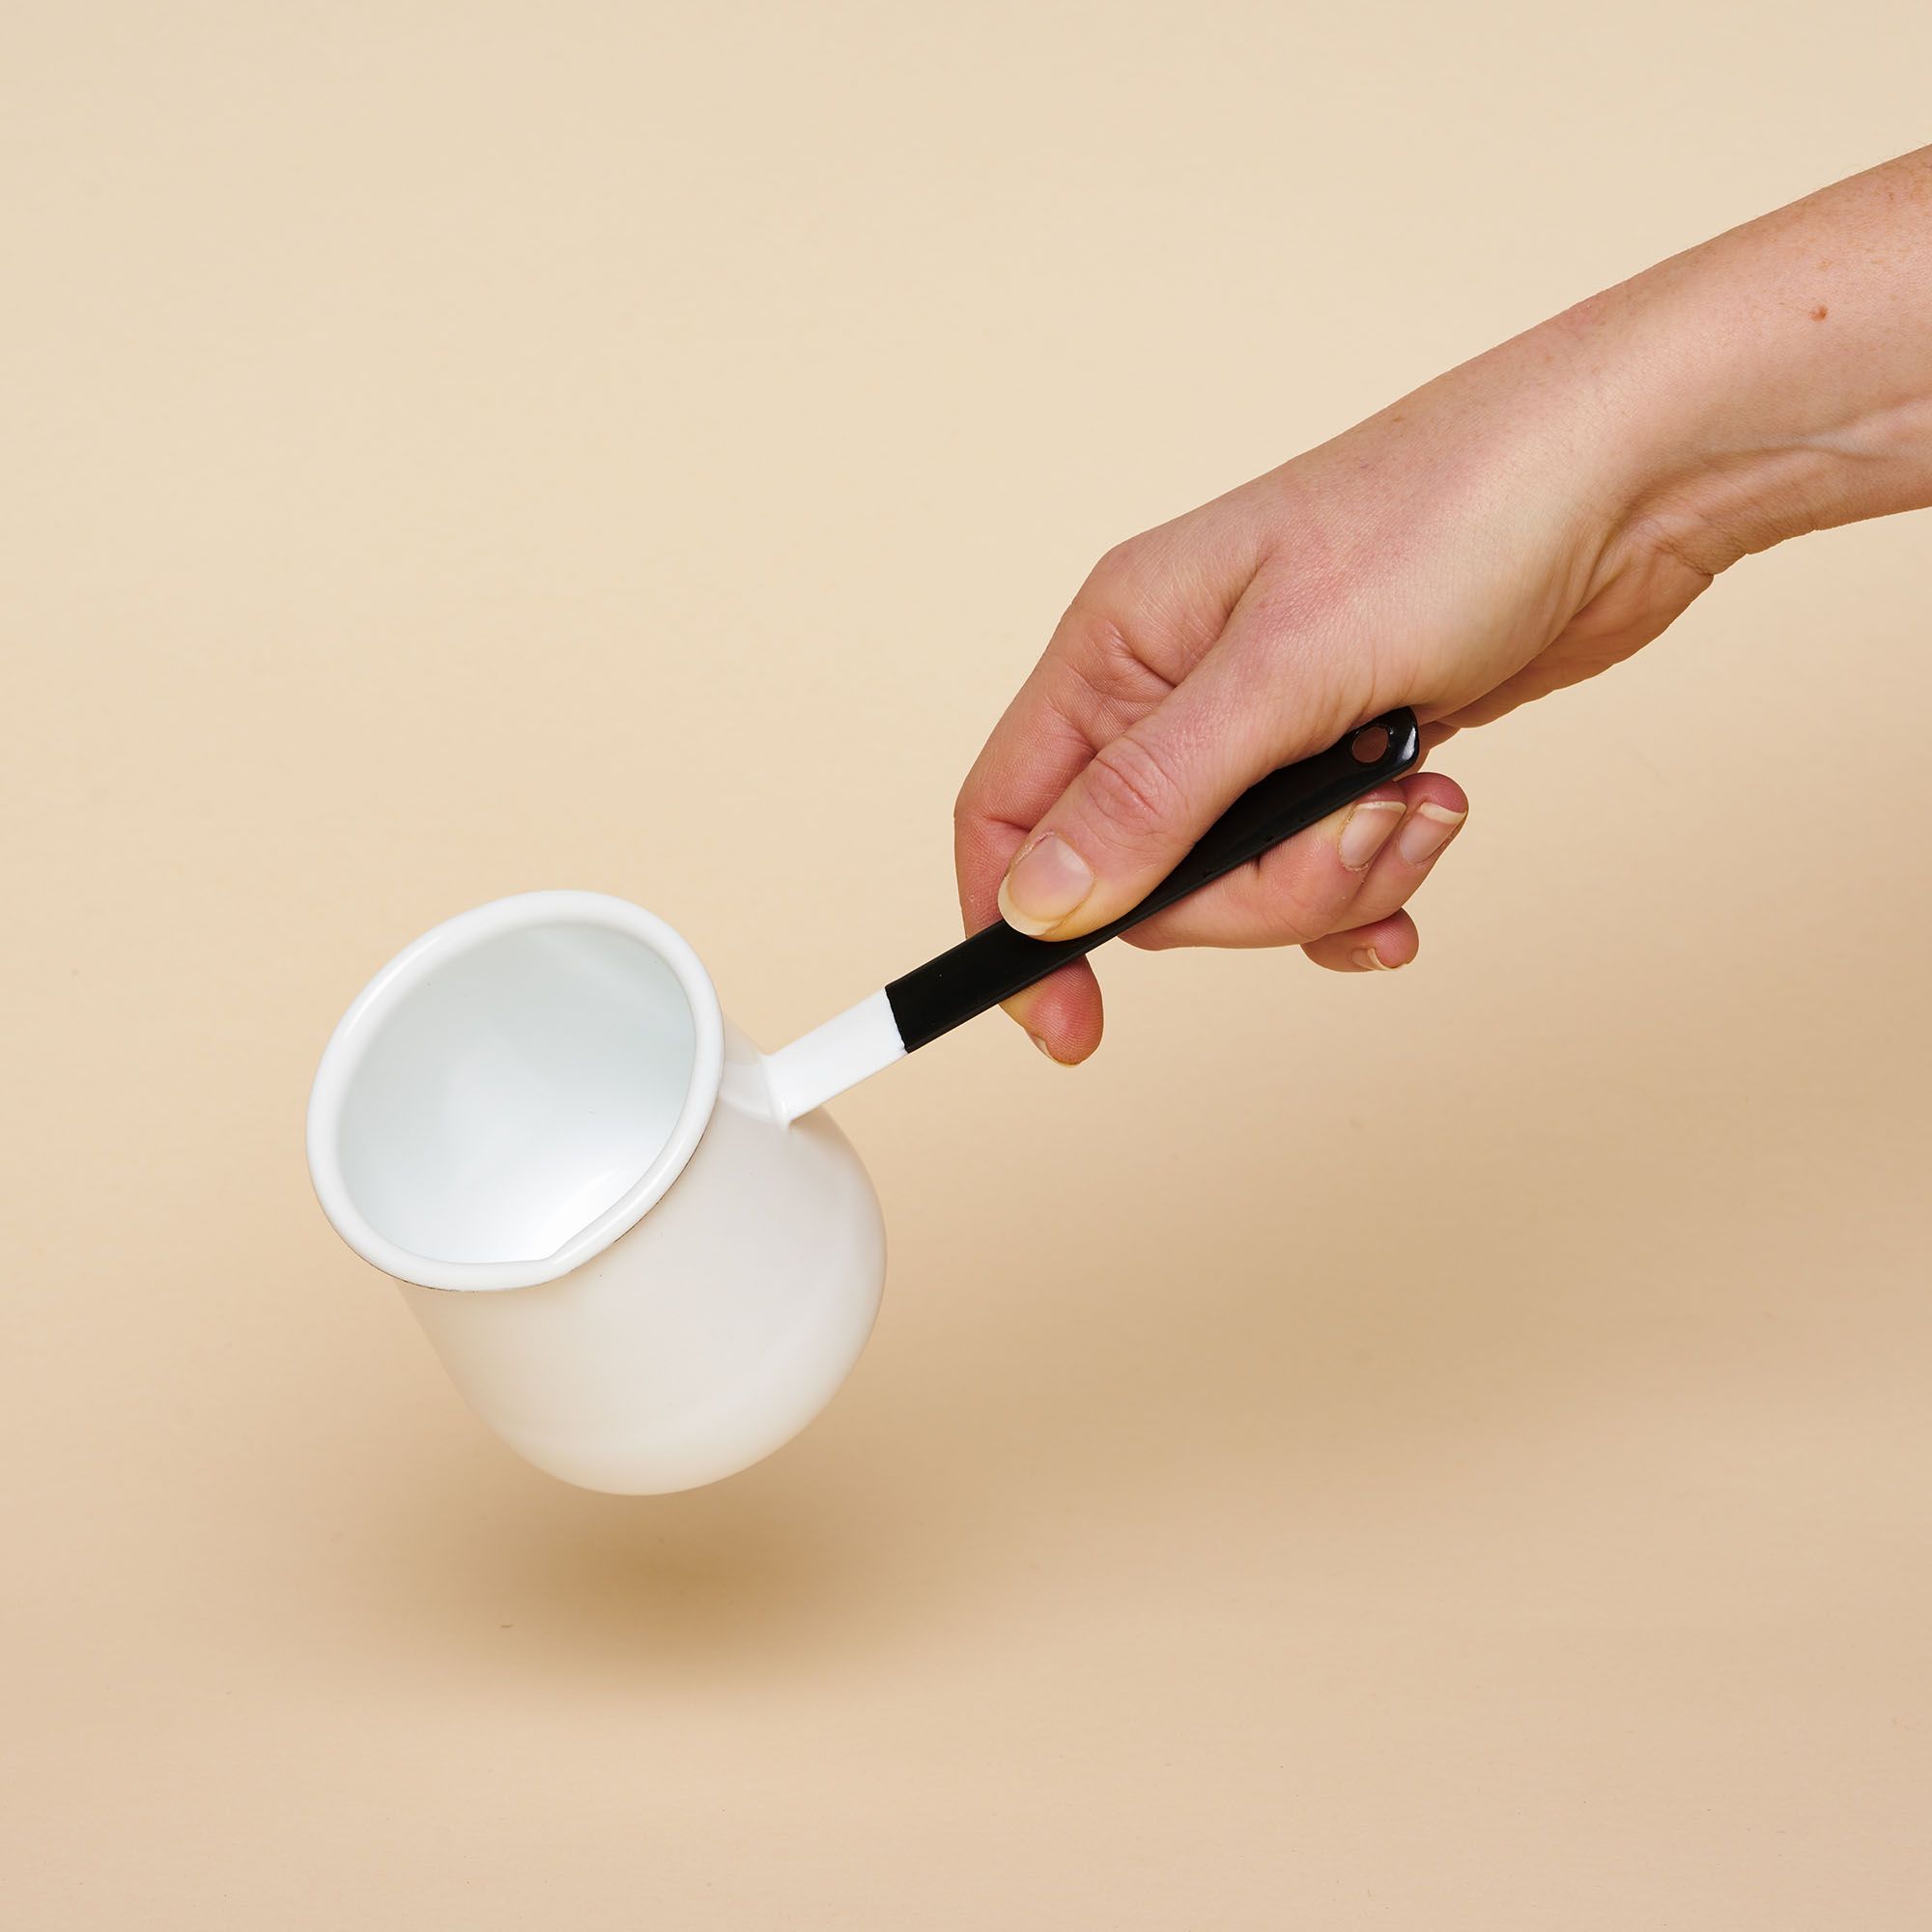 A small enamel pot that could fit in the palm of your hand